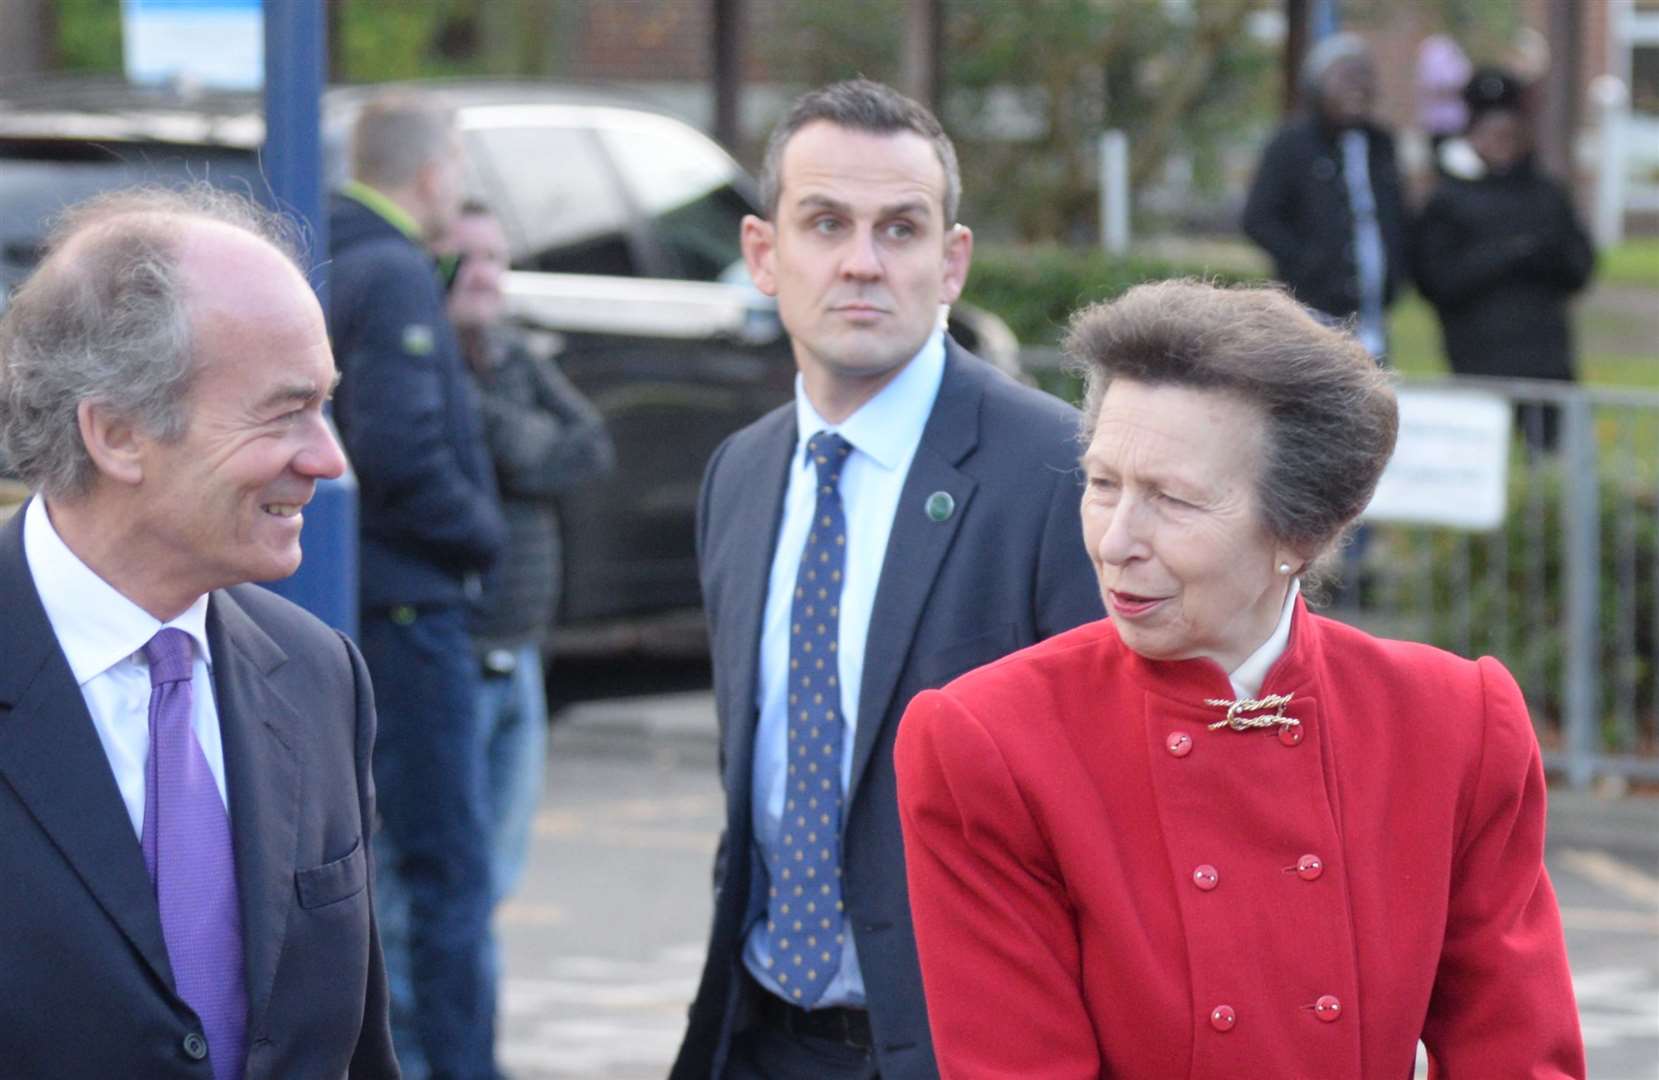 Richard Oldfield, Ed's father, meeting The Princess Royal at Medway Maritime Hospital during his time as Vice Lord Lieutenant of Kent in 2019. Picture: Chris Davey